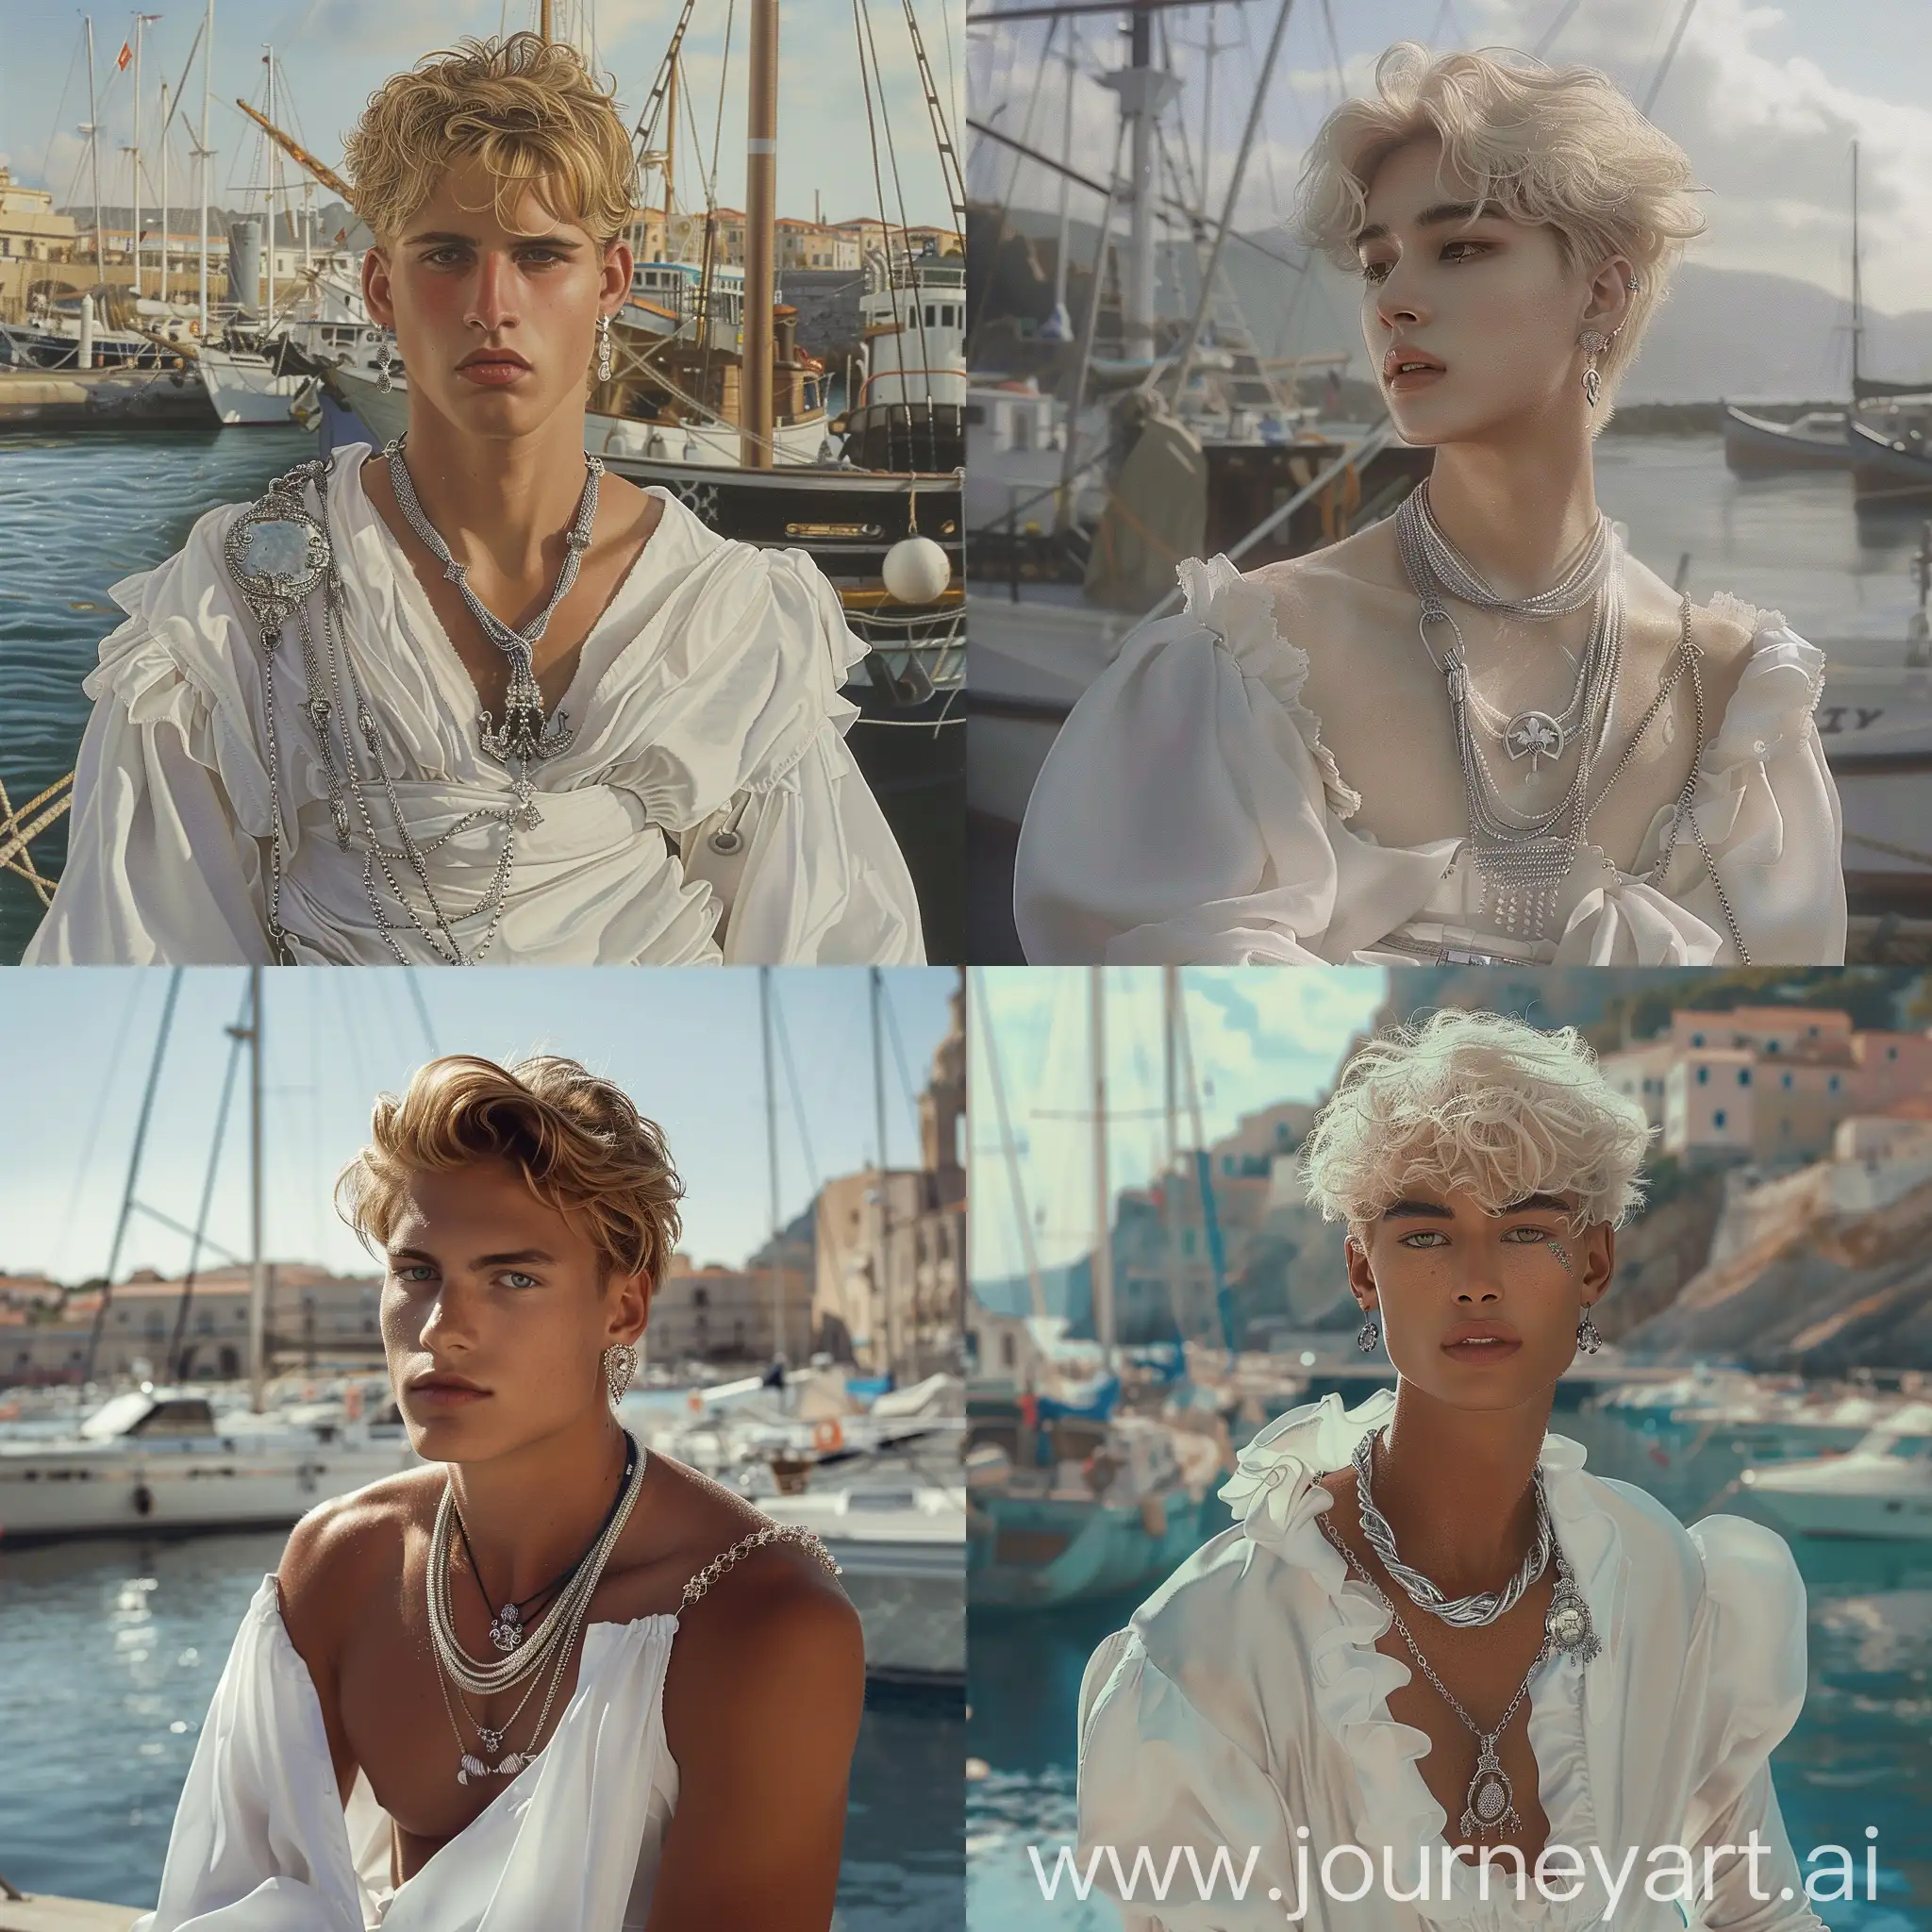 portrait of a sensual male sailor in white dress, blond hair, silver necklace and earrings, in a harbor